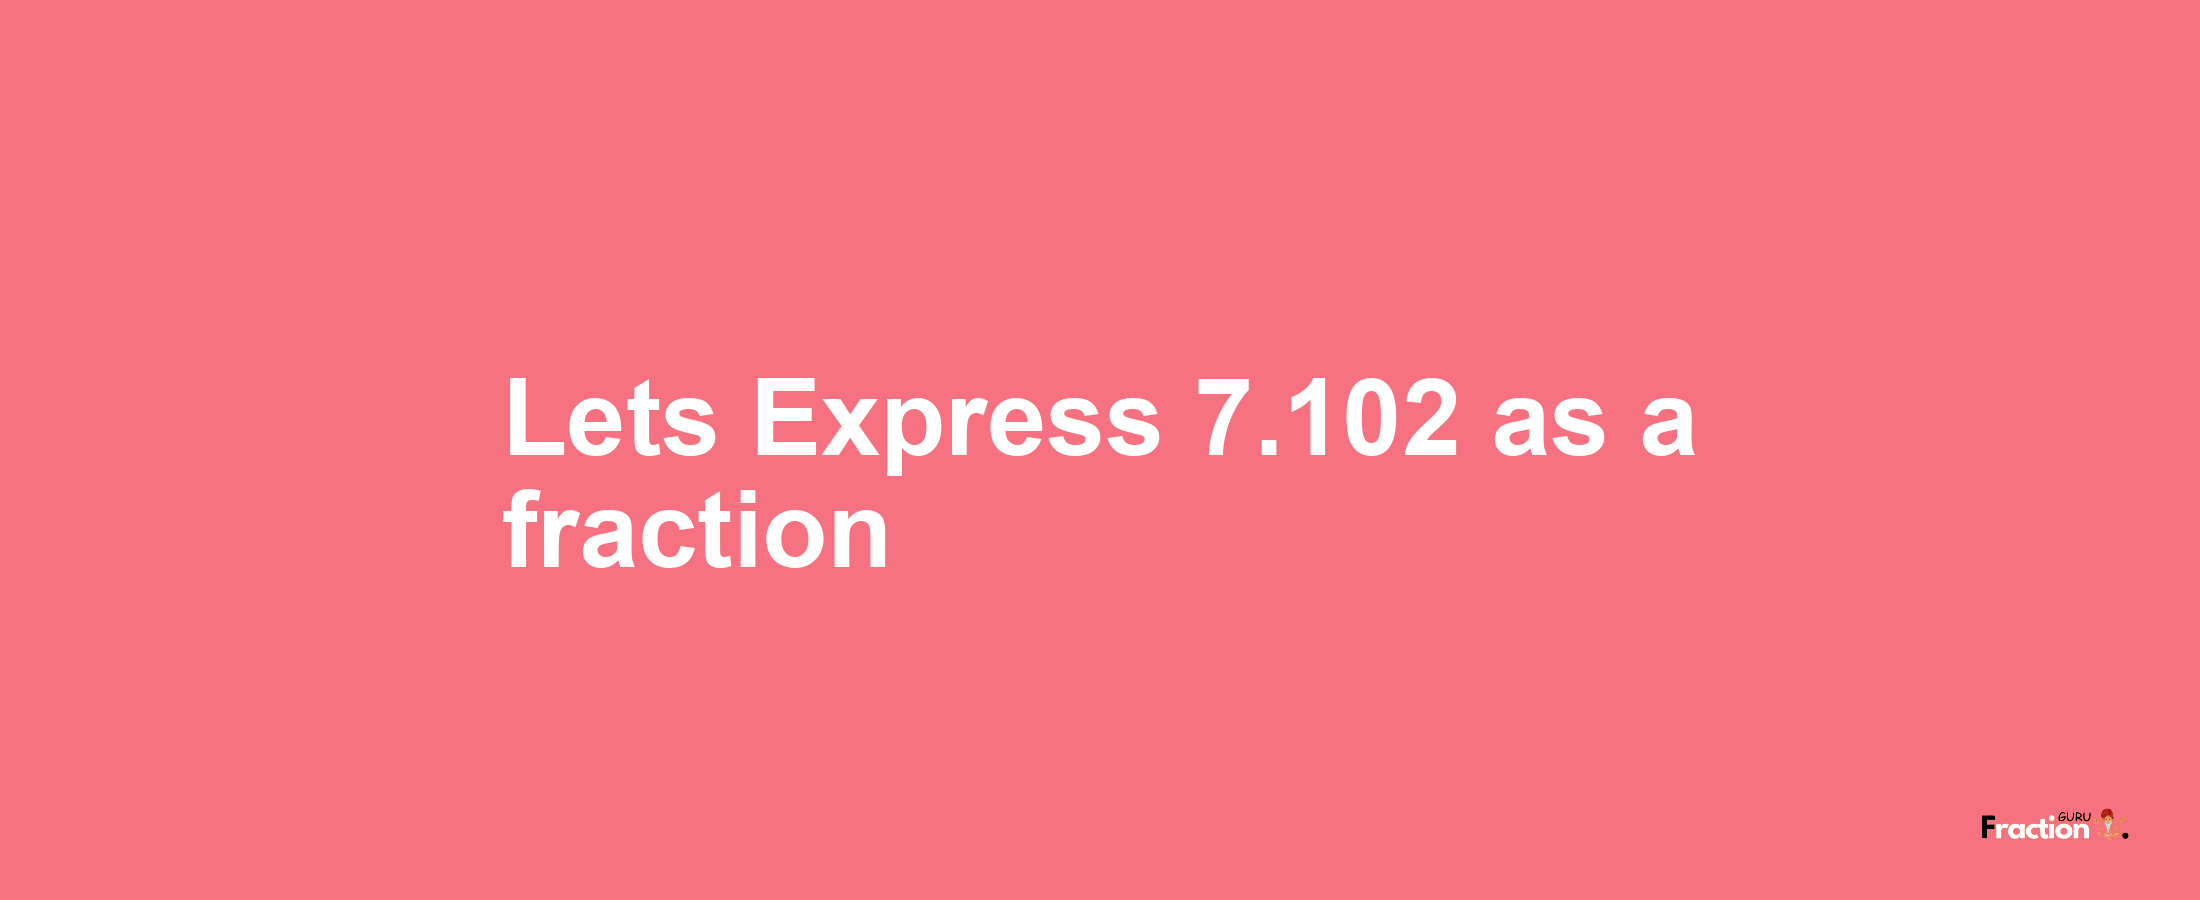 Lets Express 7.102 as afraction